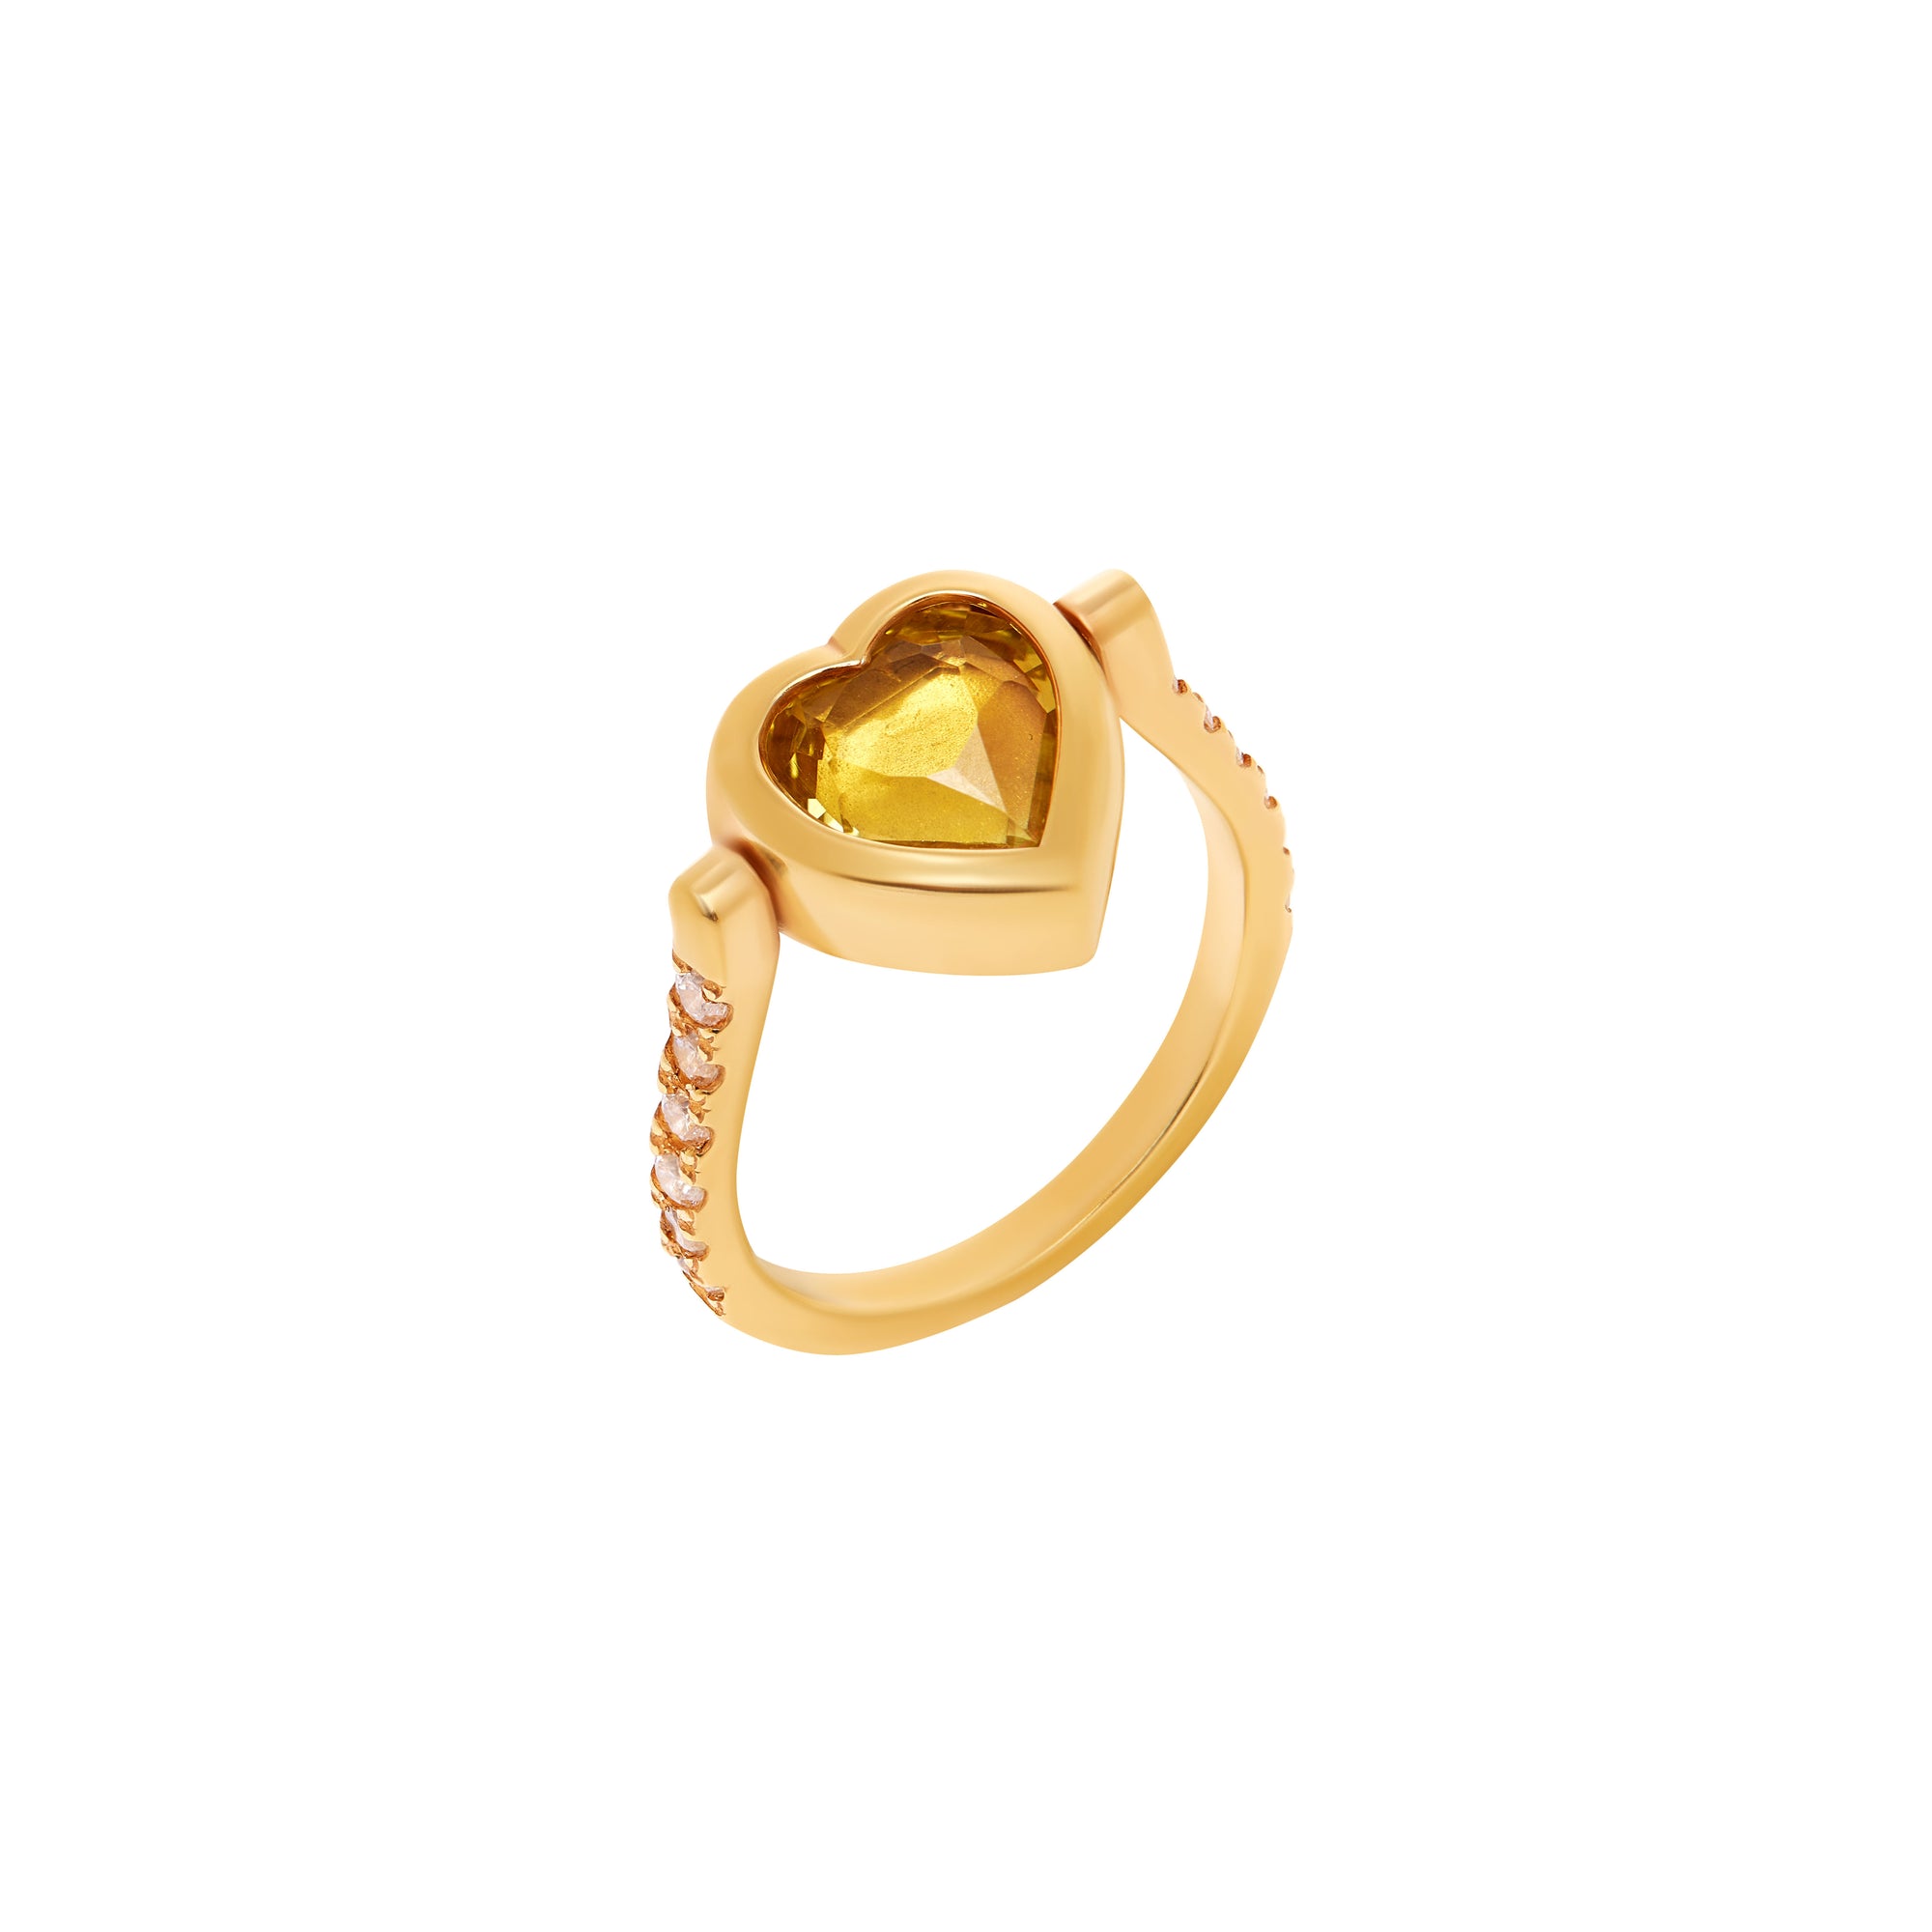 Ring 'Citrine Eddy Heart' – You Are So Strong